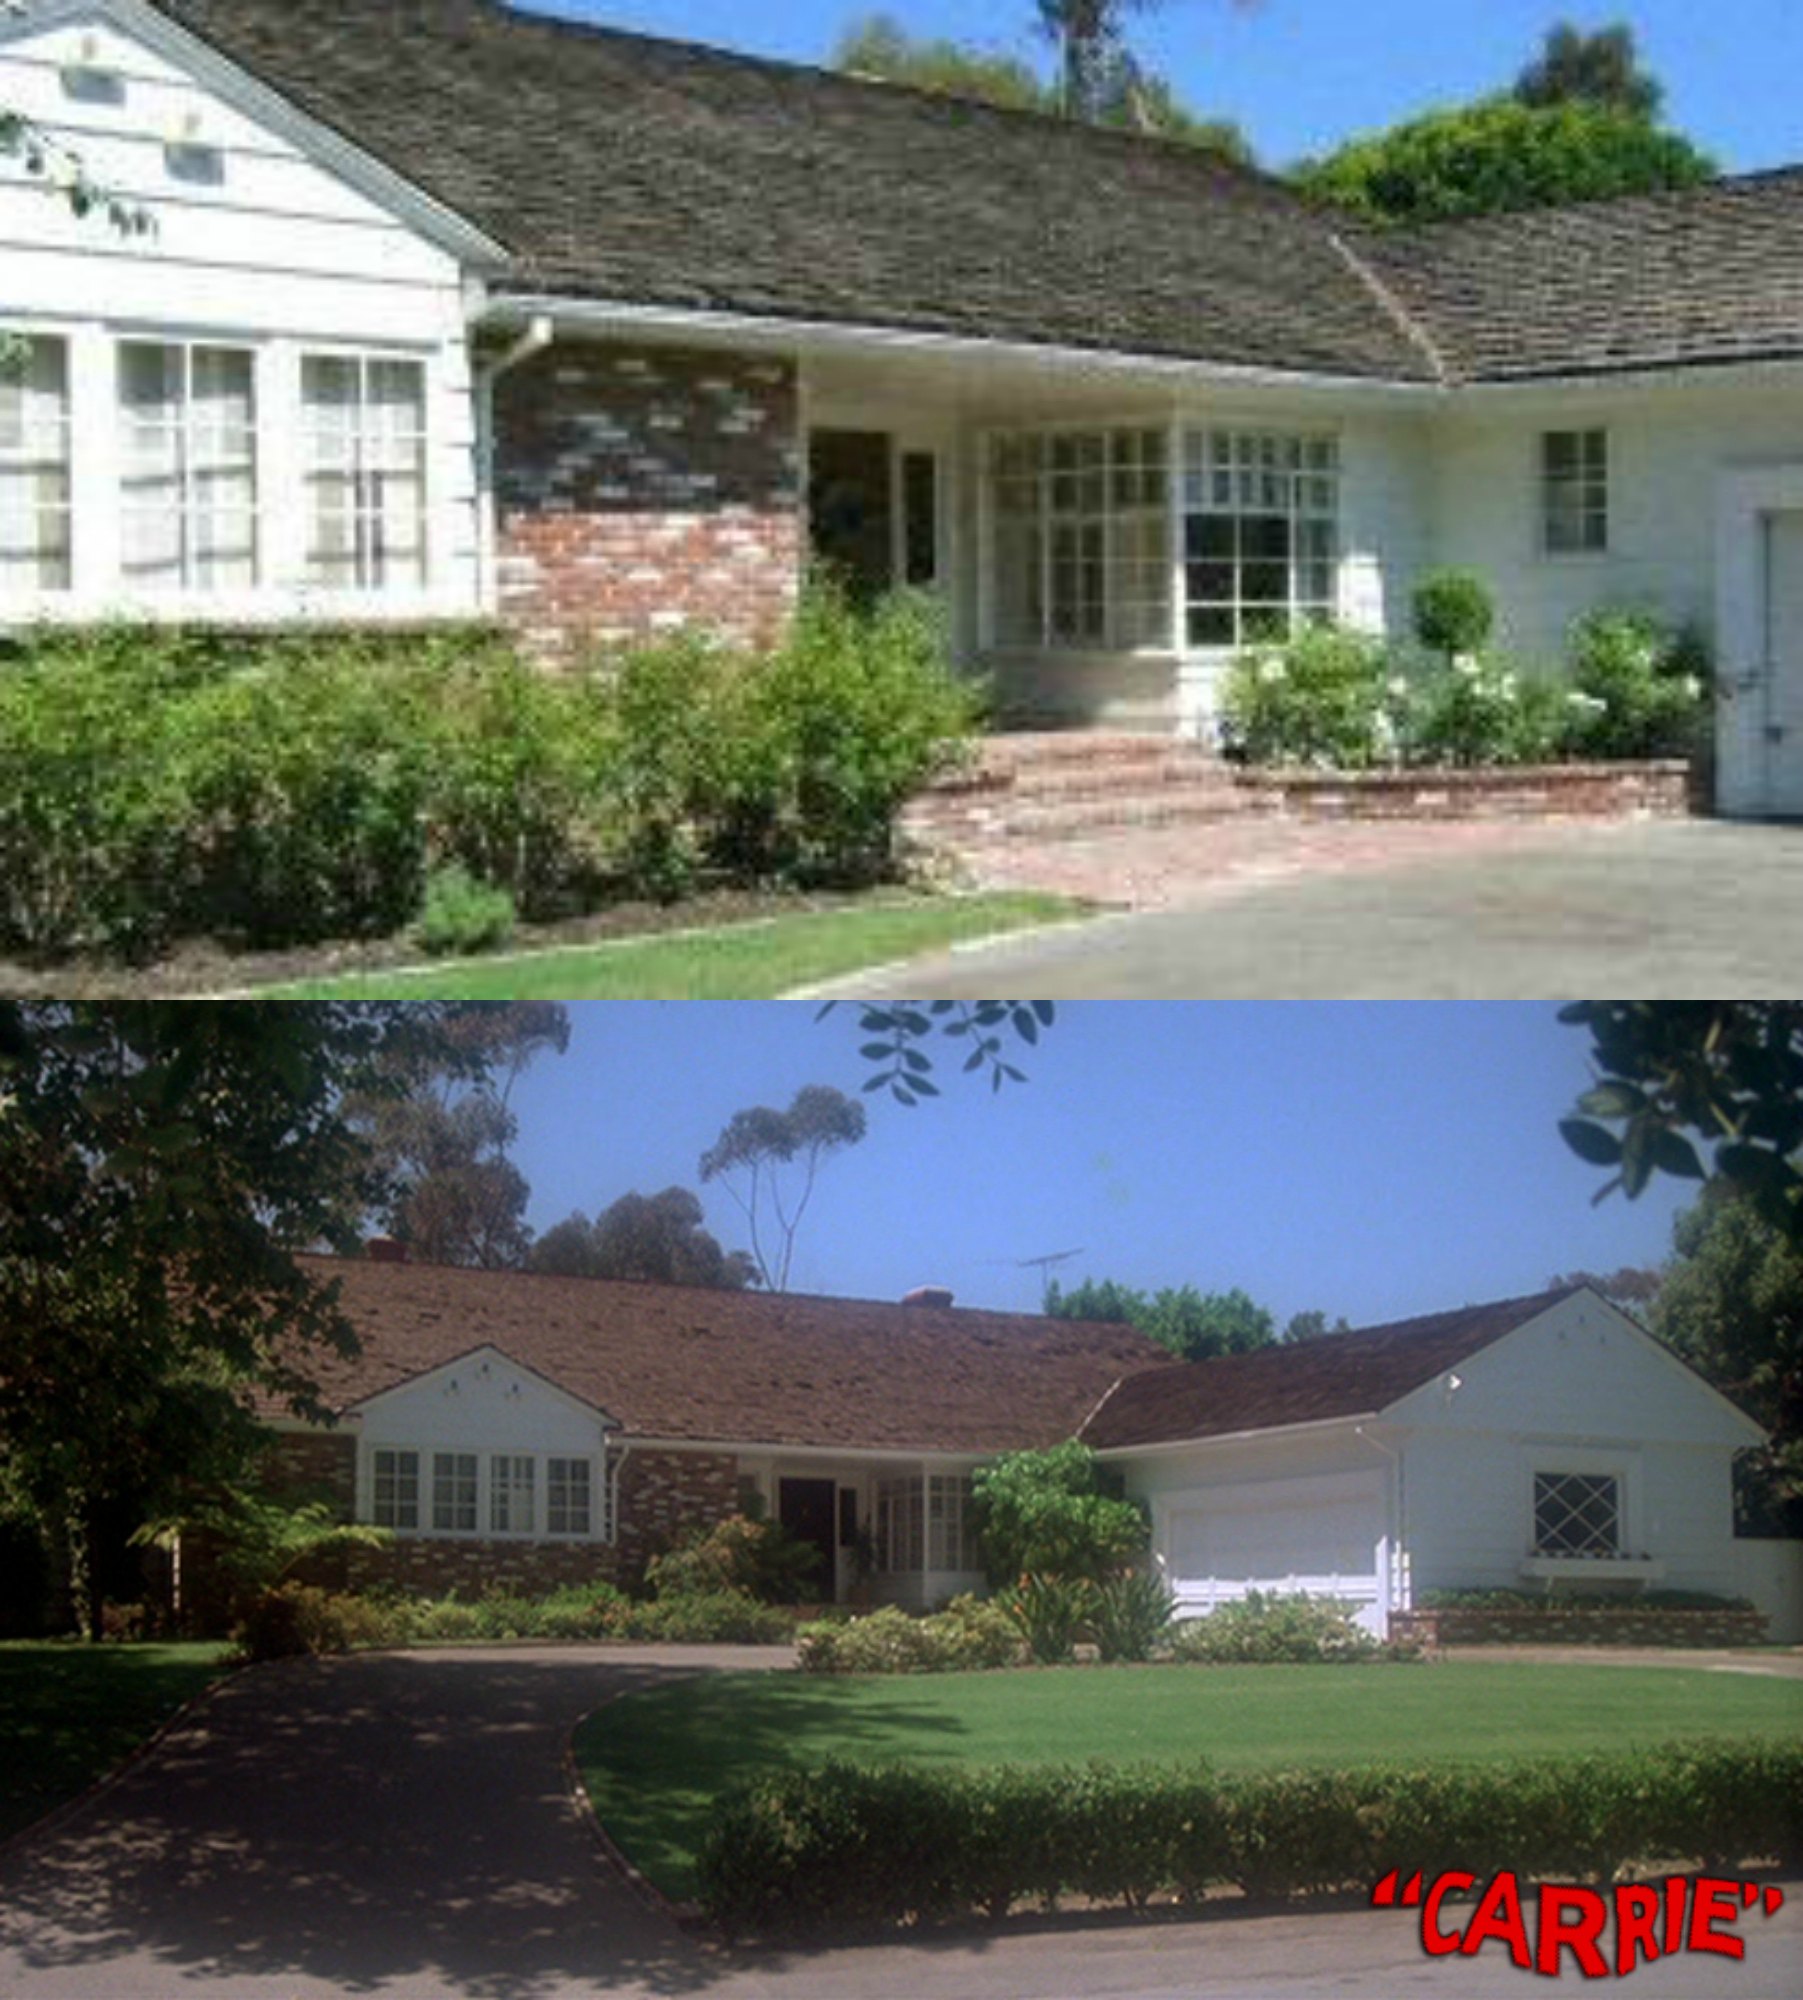 Carrie 1976 Snell house comparison.jpg